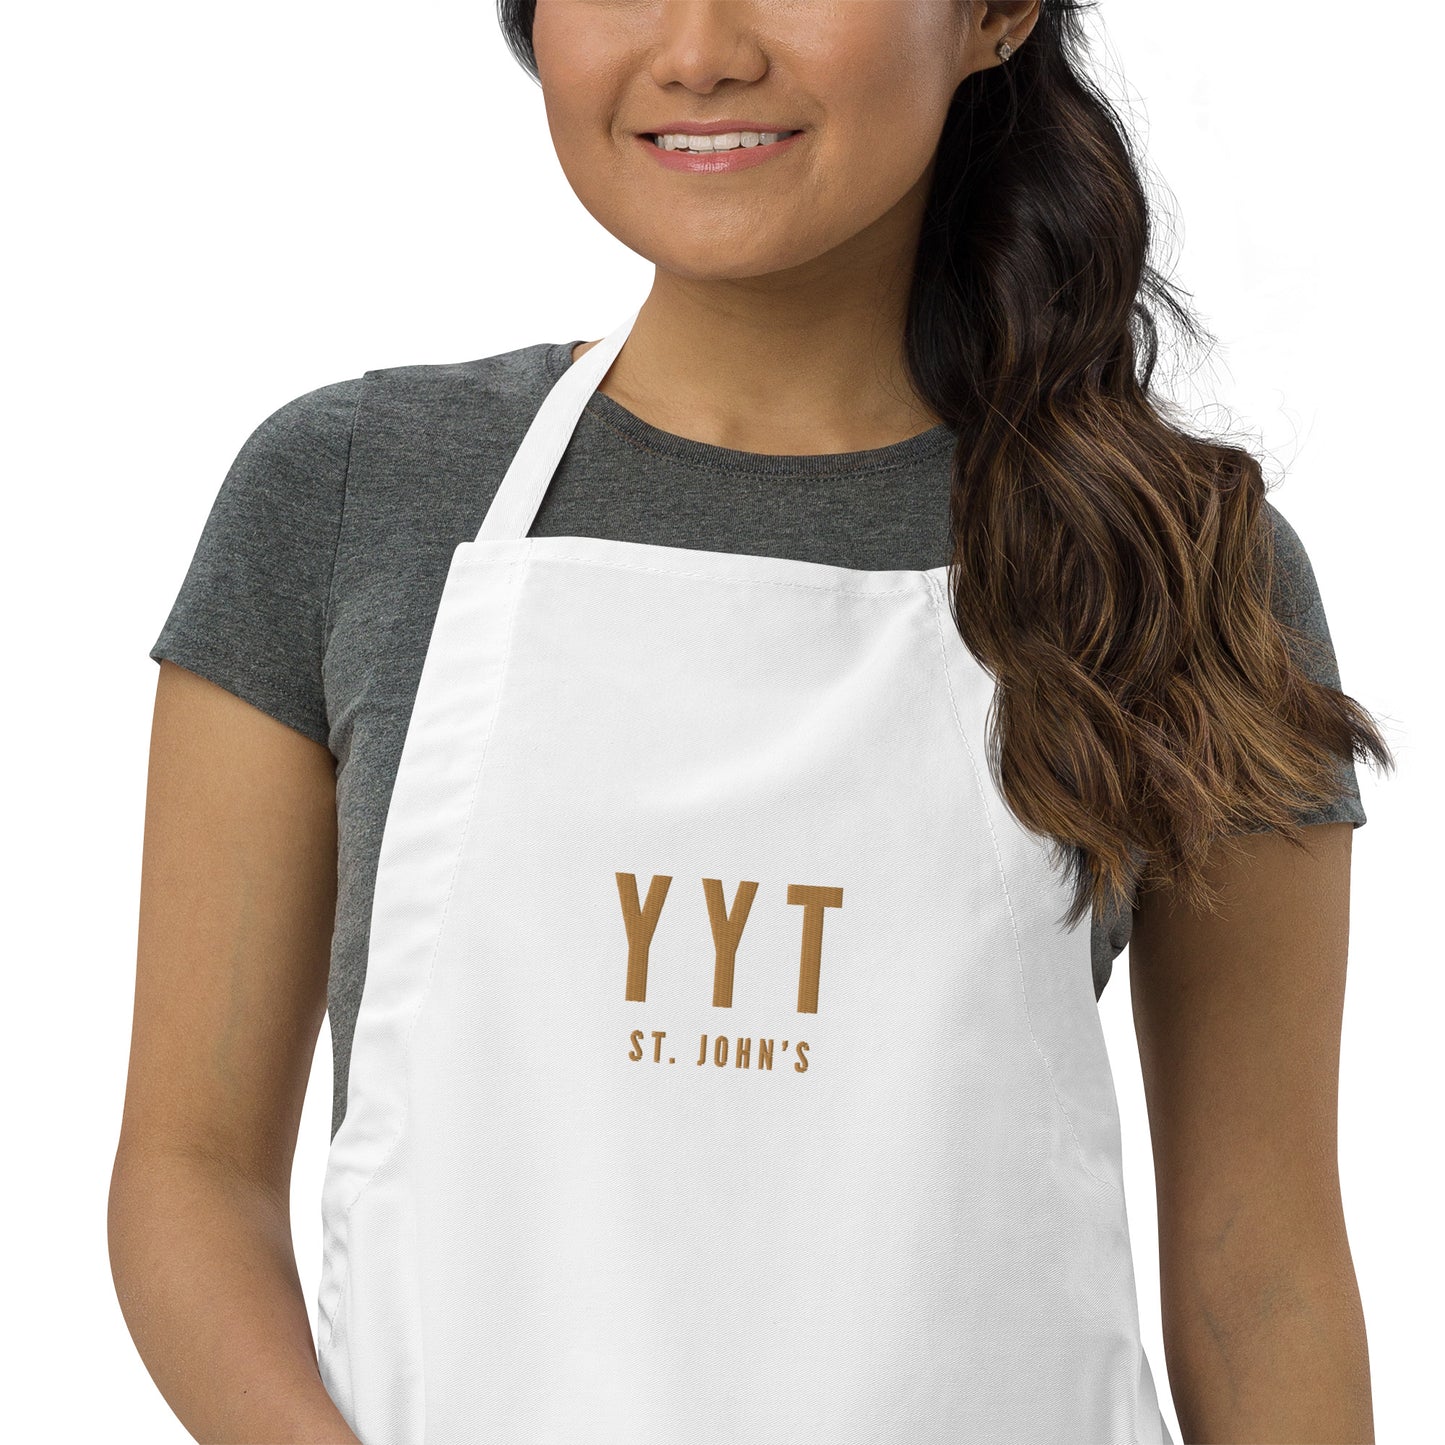 City Embroidered Apron - Old Gold • YYT St. John's • YHM Designs - Image 08